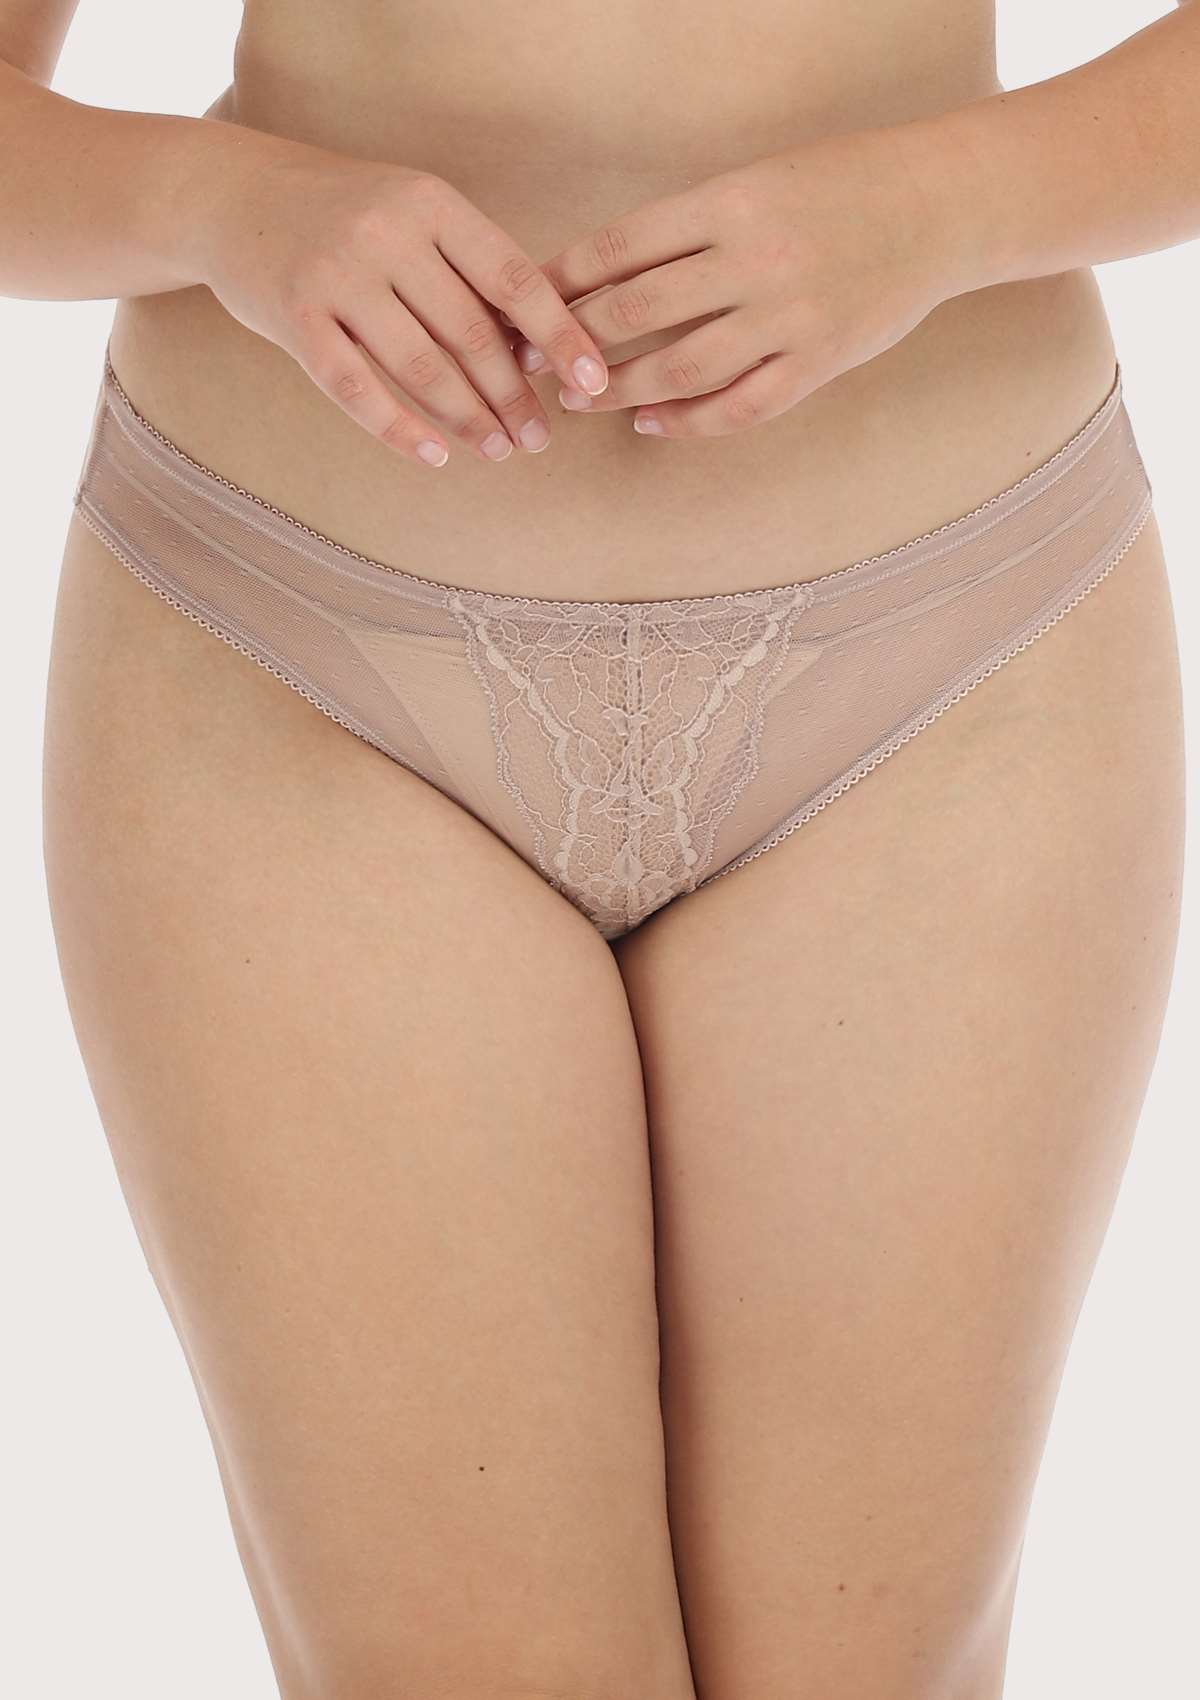 HSIA Mid-Rise Sheer Stylish Lace-Trimmed Supportive Comfy Mesh Pantie - XXXL / Dark Pink / Bikini